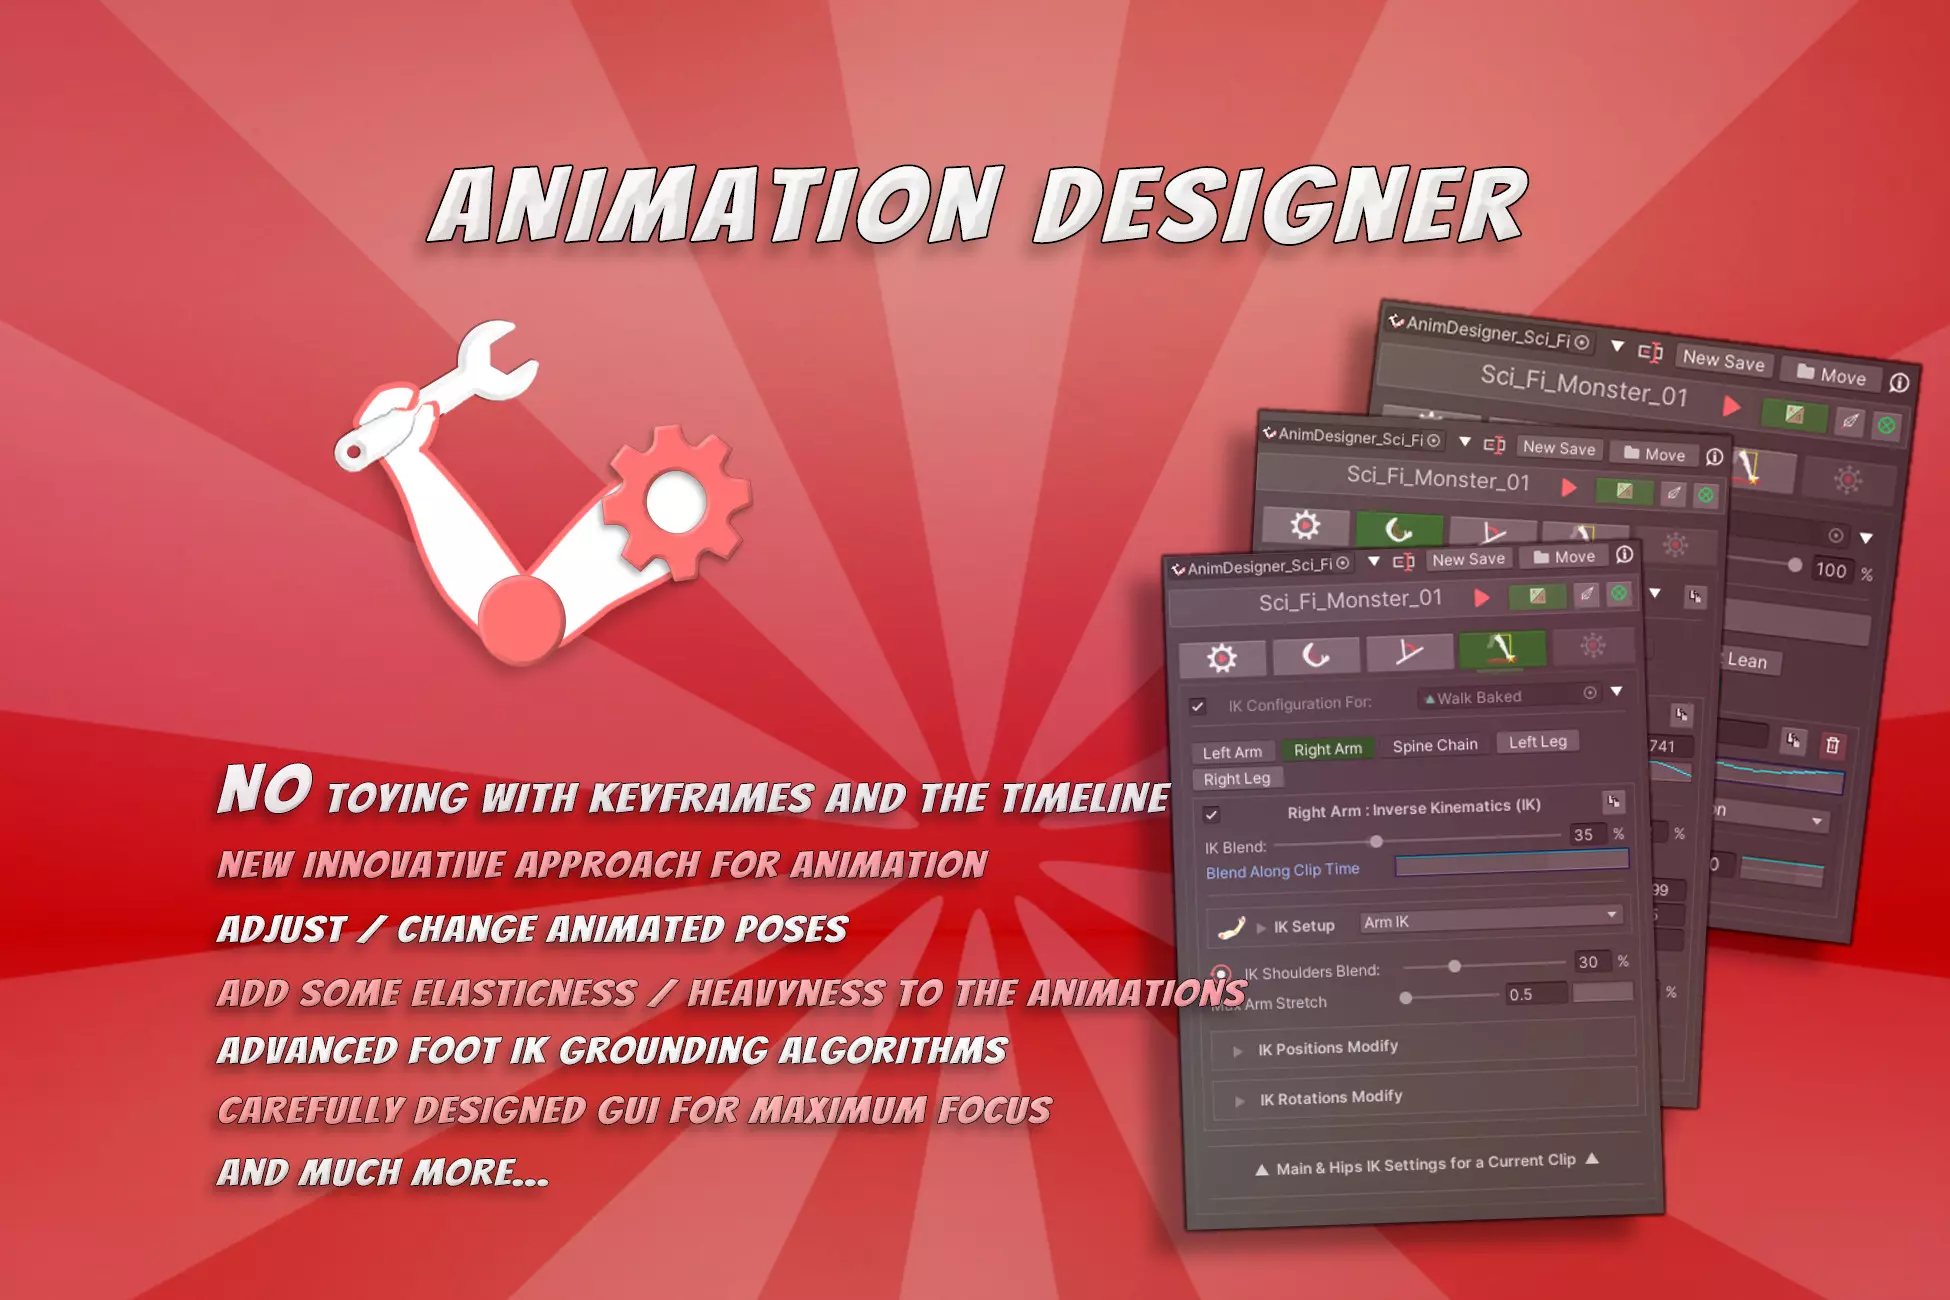 This is a descriptive video of what animation designer has to offer for it's users